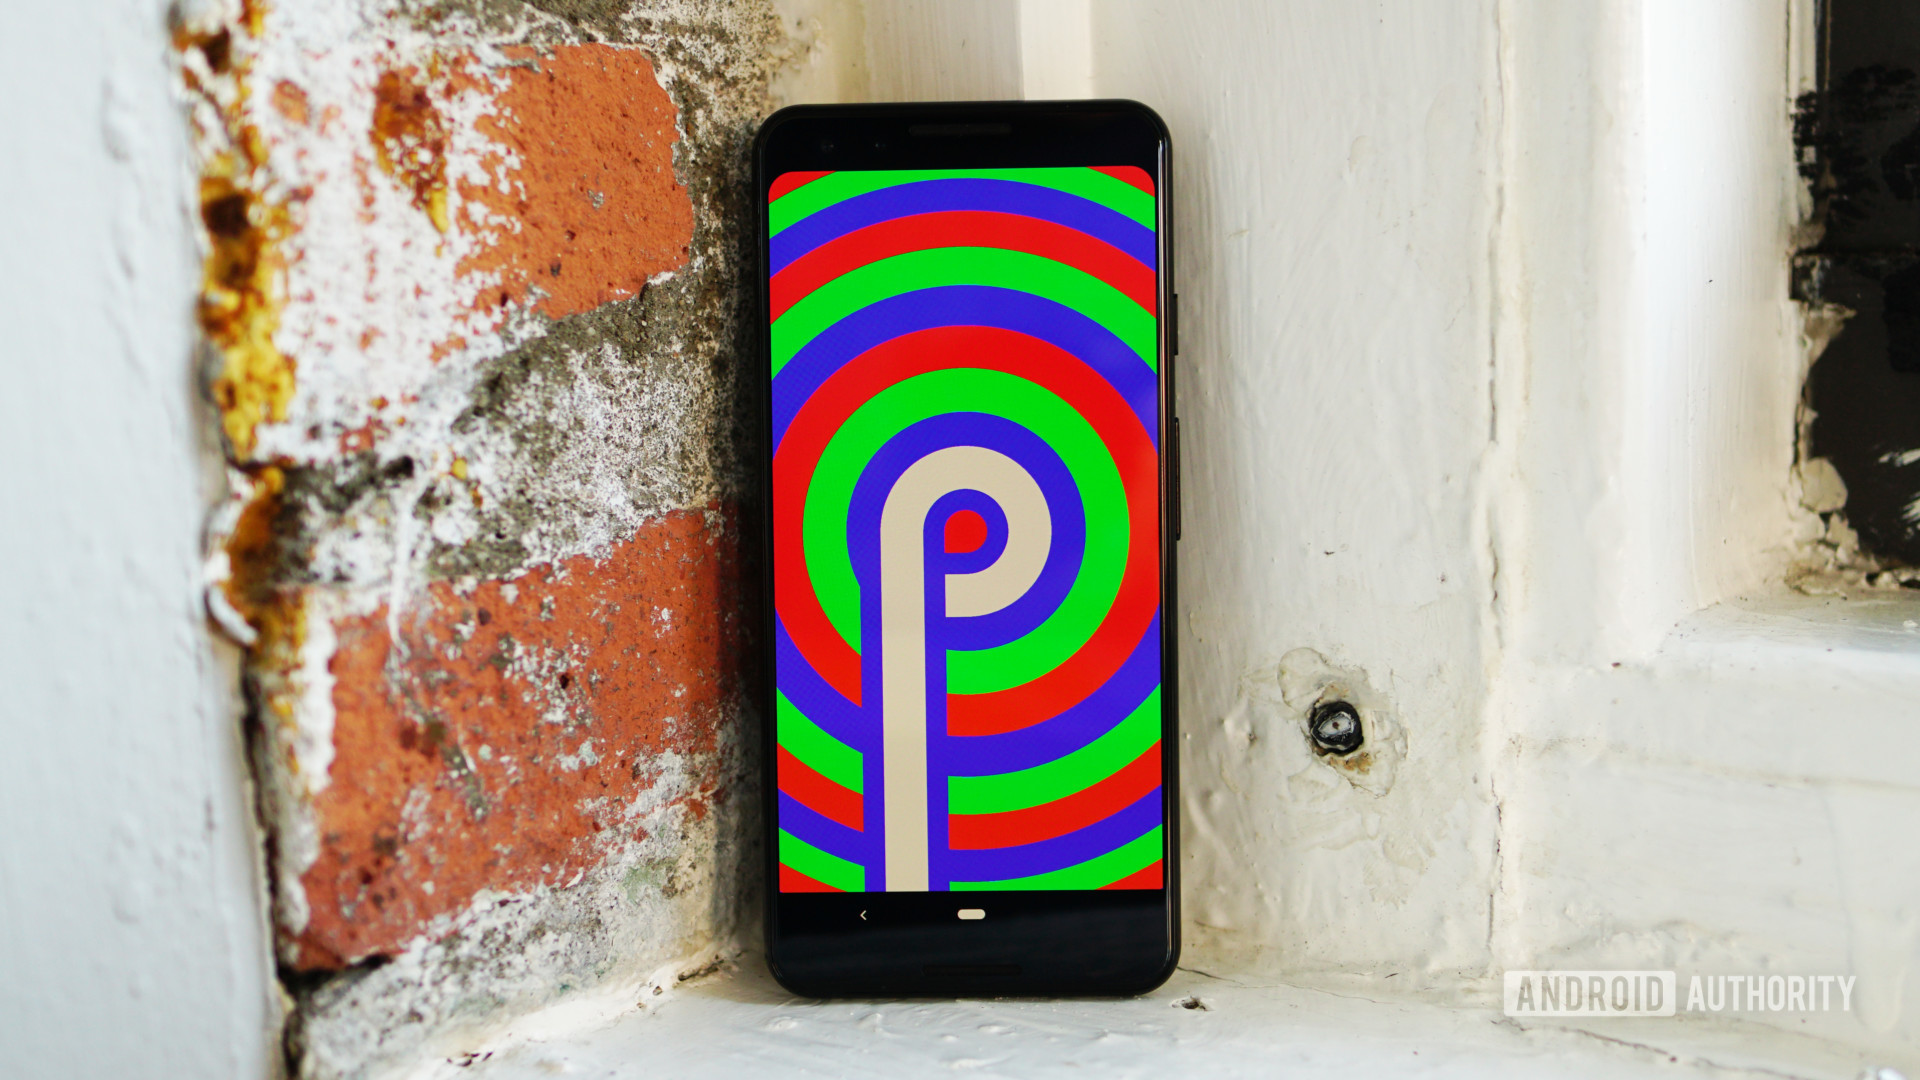 Android 9.0 Pie - Easter egg